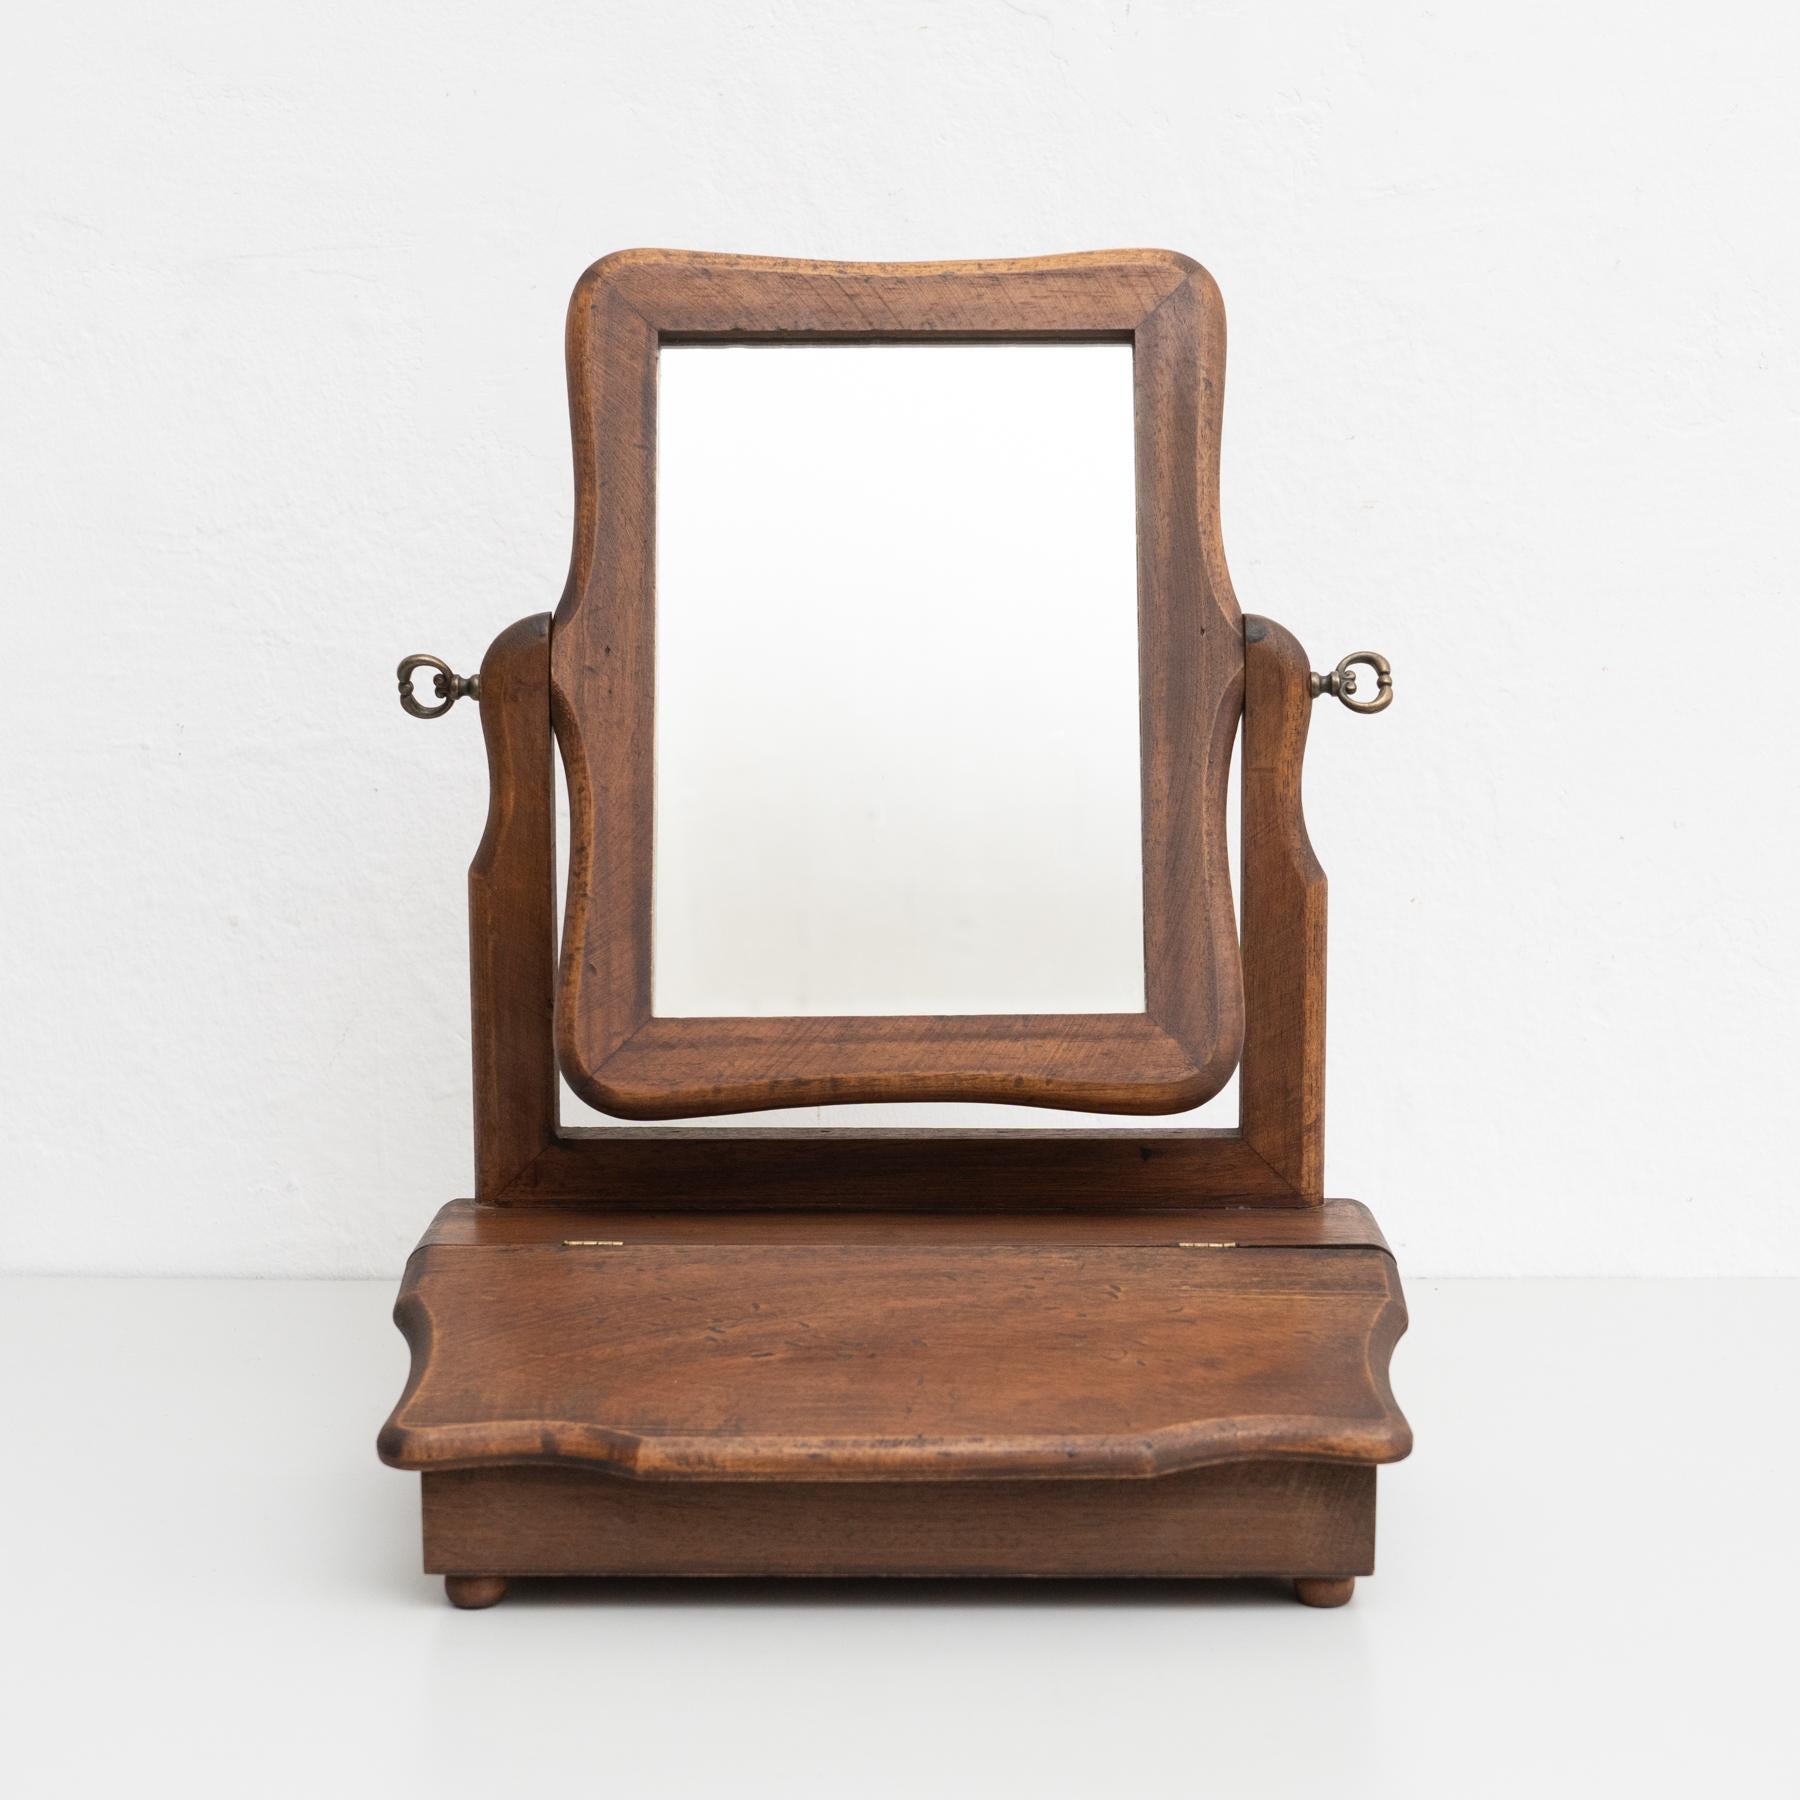 Antique Spanish handcrafted wooden dresser mirror.

Manufactured by unknown designer in Spain, circa 1940

In original condition, with minor wear consistent of age and use, preserving a beautiful patina.

Materials:
Mirror.
Wood.